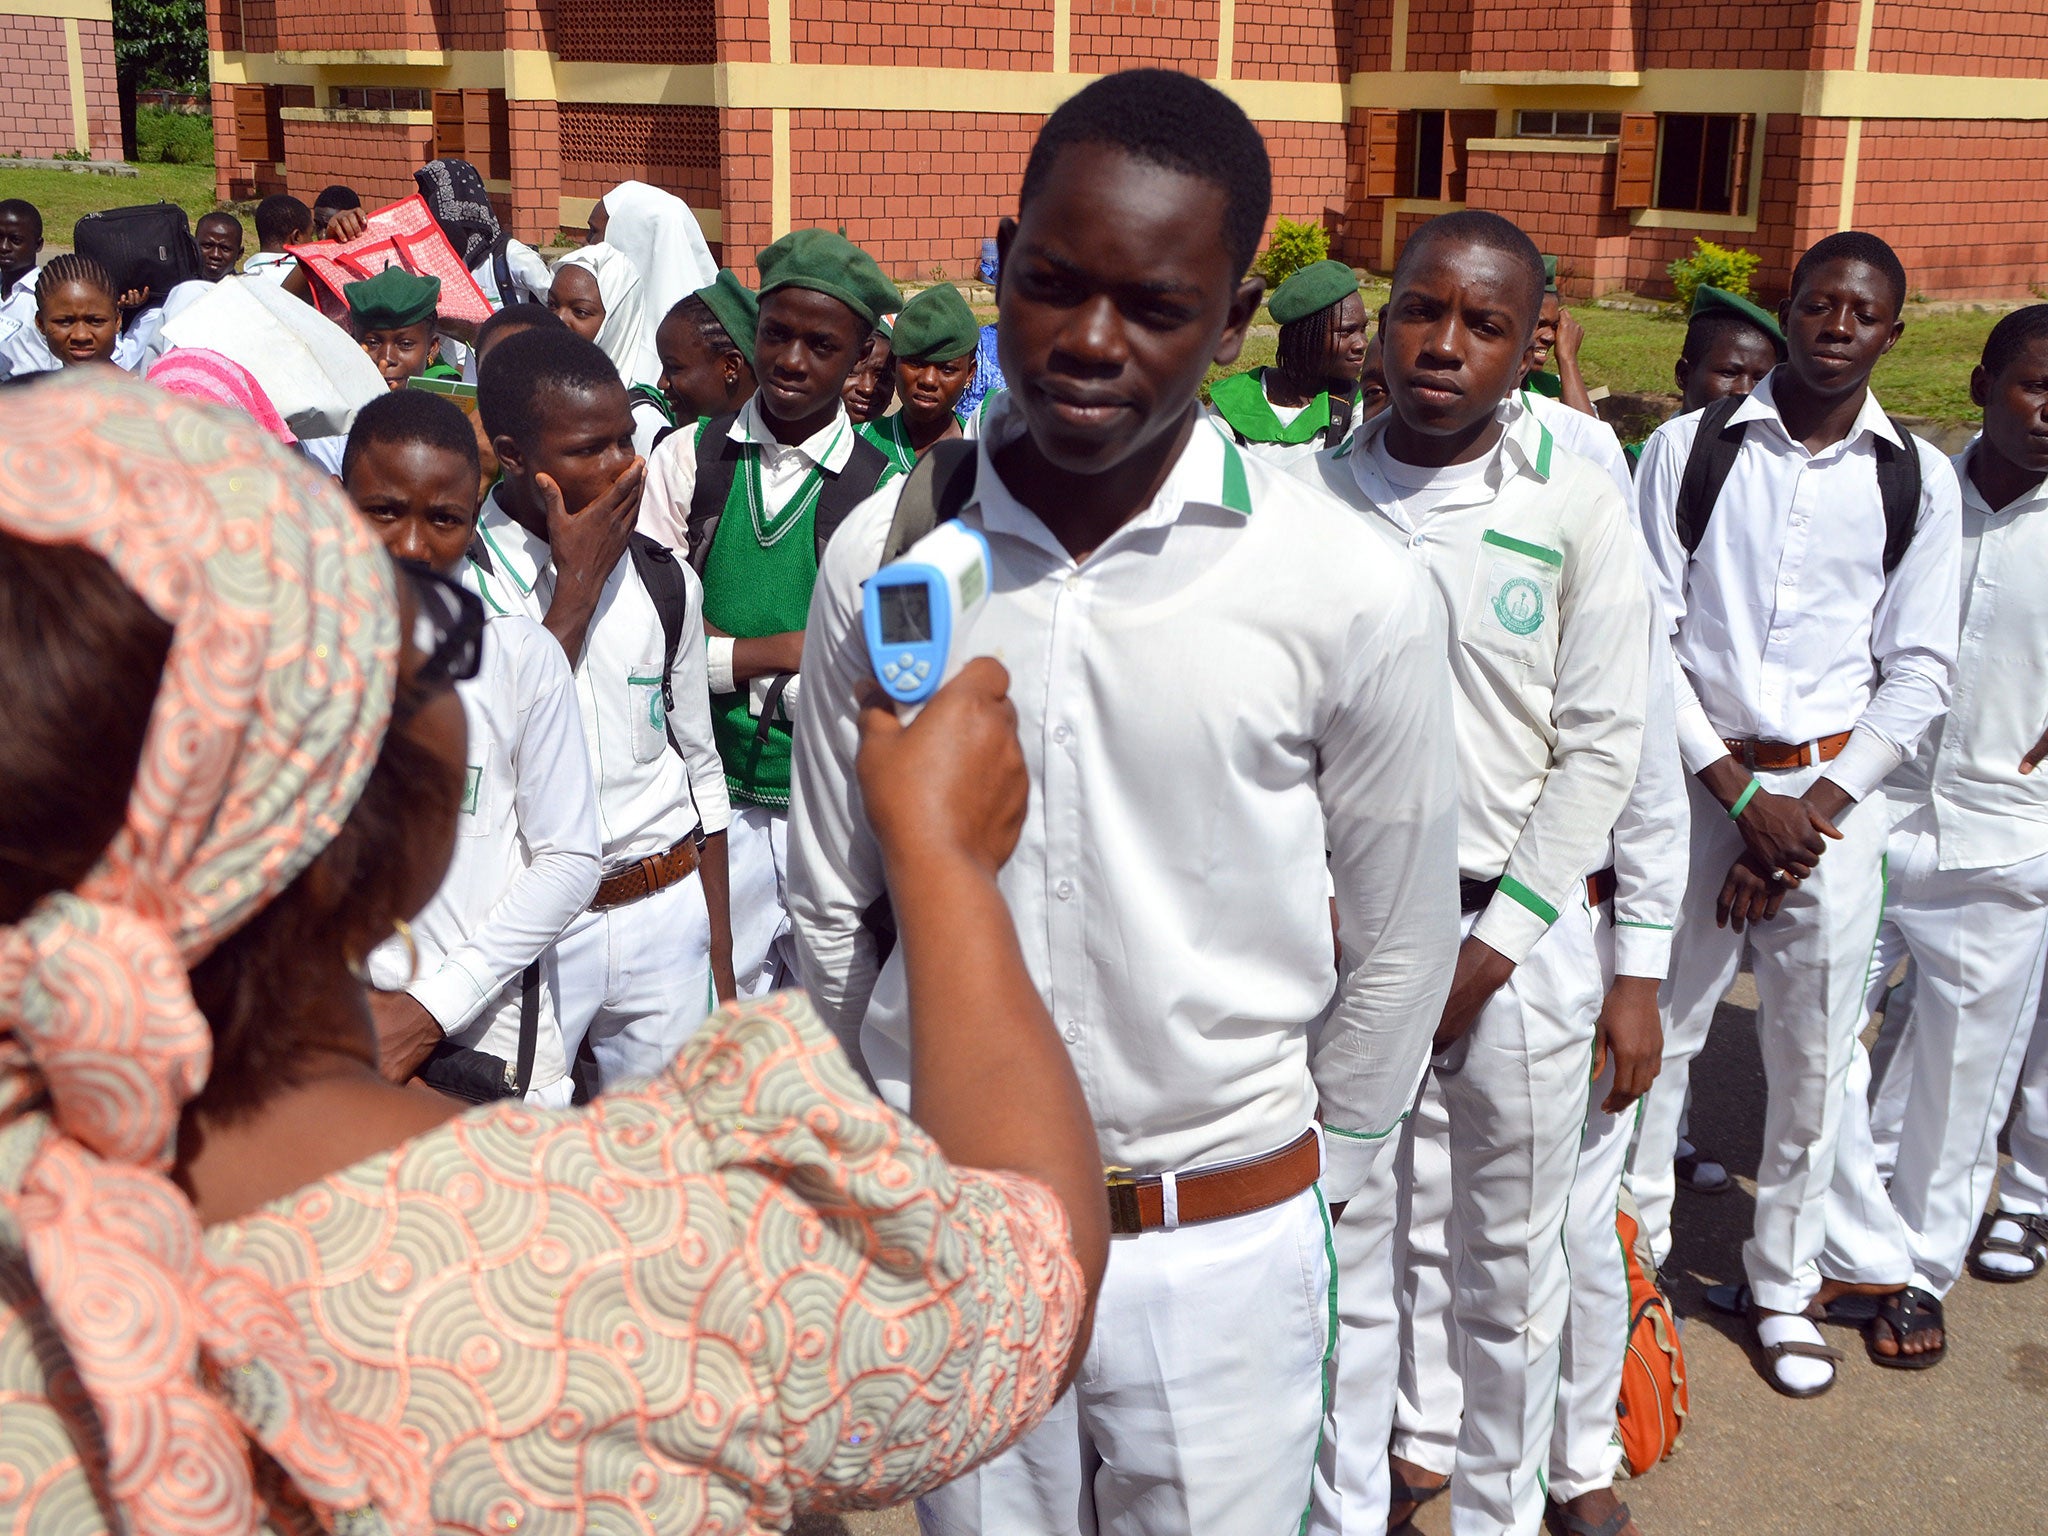 22 September 2014: A secondary school principal checks a student's temperature for ebola symptoms during an assembly in Abuja as schools reopened after an enforced extension to the summer holidays because of the outbreak of the virus in the cities of Lago